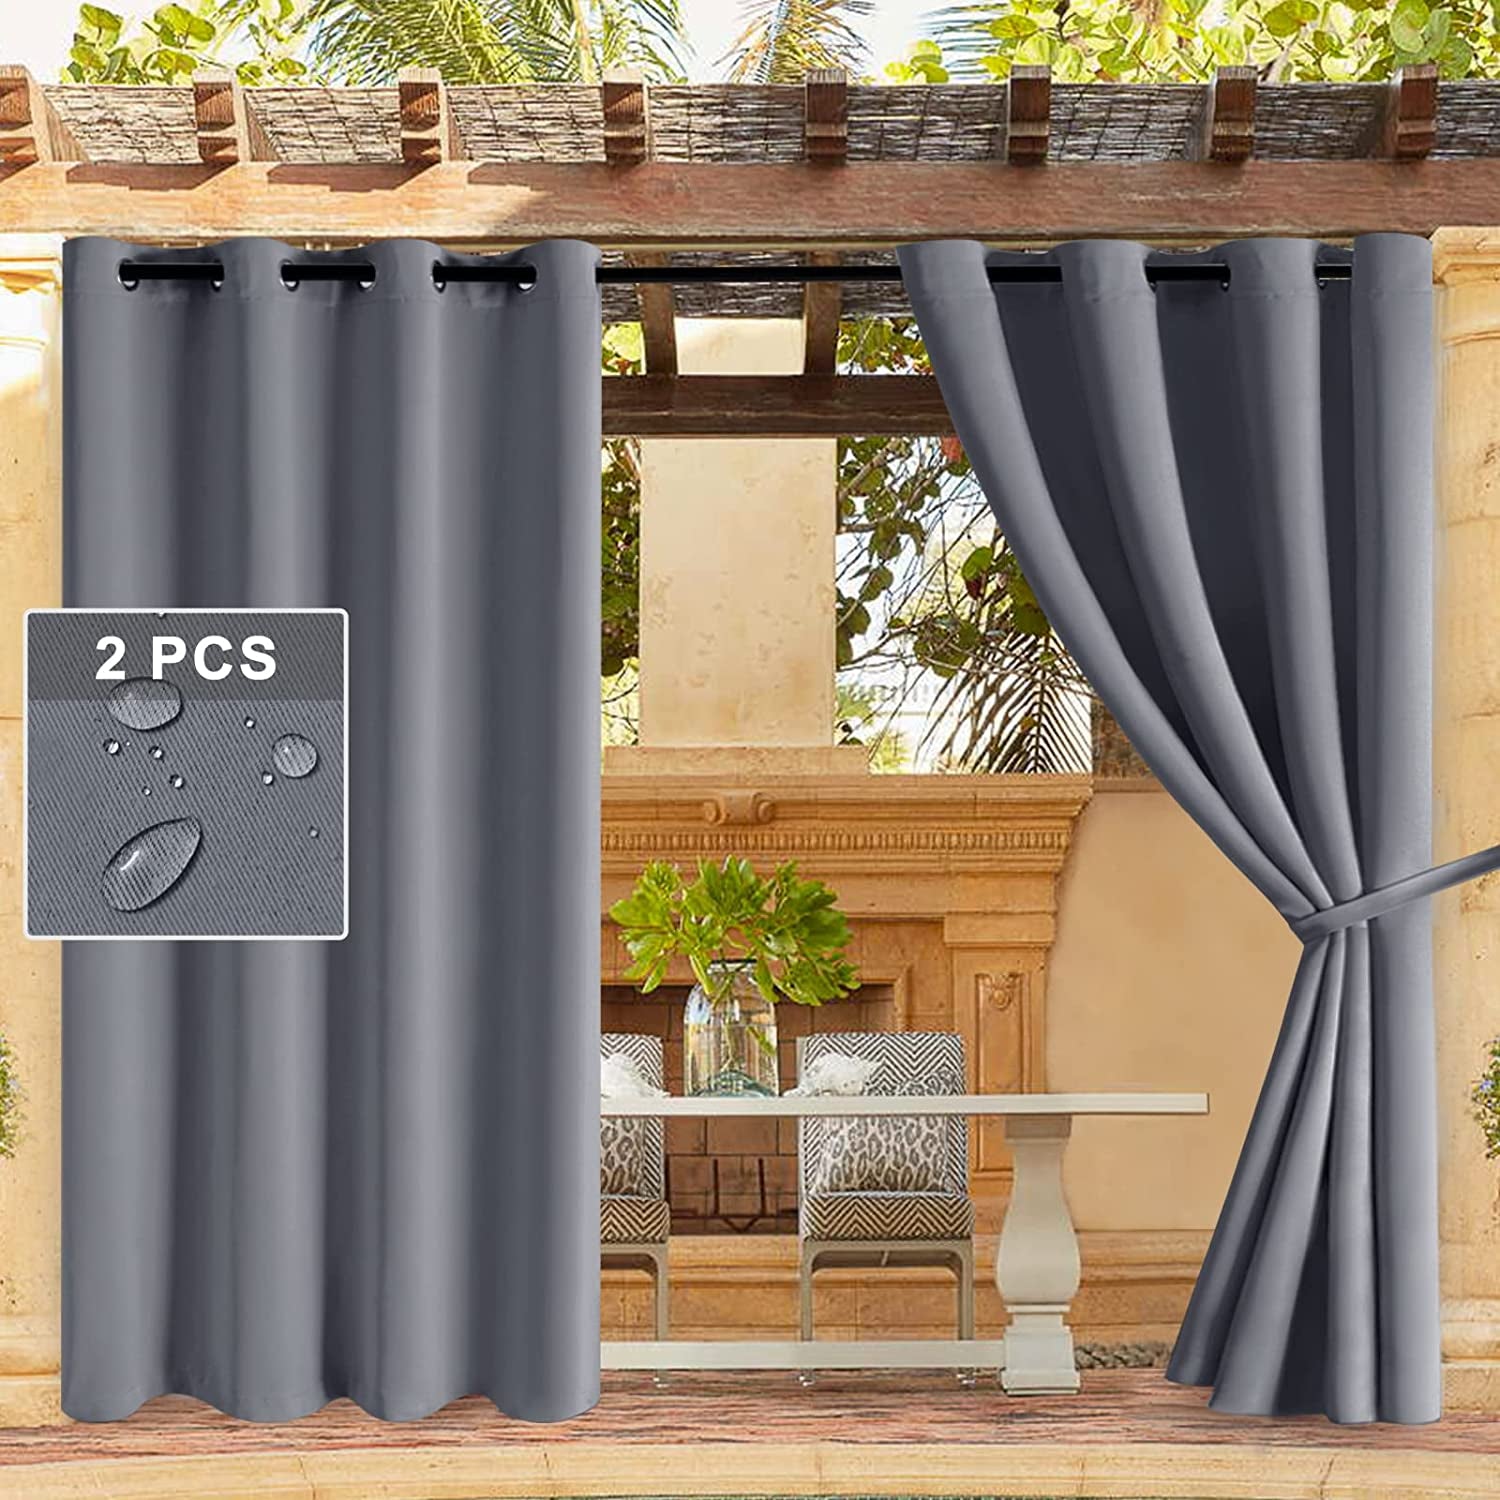 DWCN, DWCN Waterproof Outdoor Curtains for Patio - Indoor Outdoor Thermal Insulated, Sun Blocking Grommet Blackout Curtains for Bedroom, Pergola, Porch and Cabana, Grey, 52 X 108 Inches Long, 2 Panels